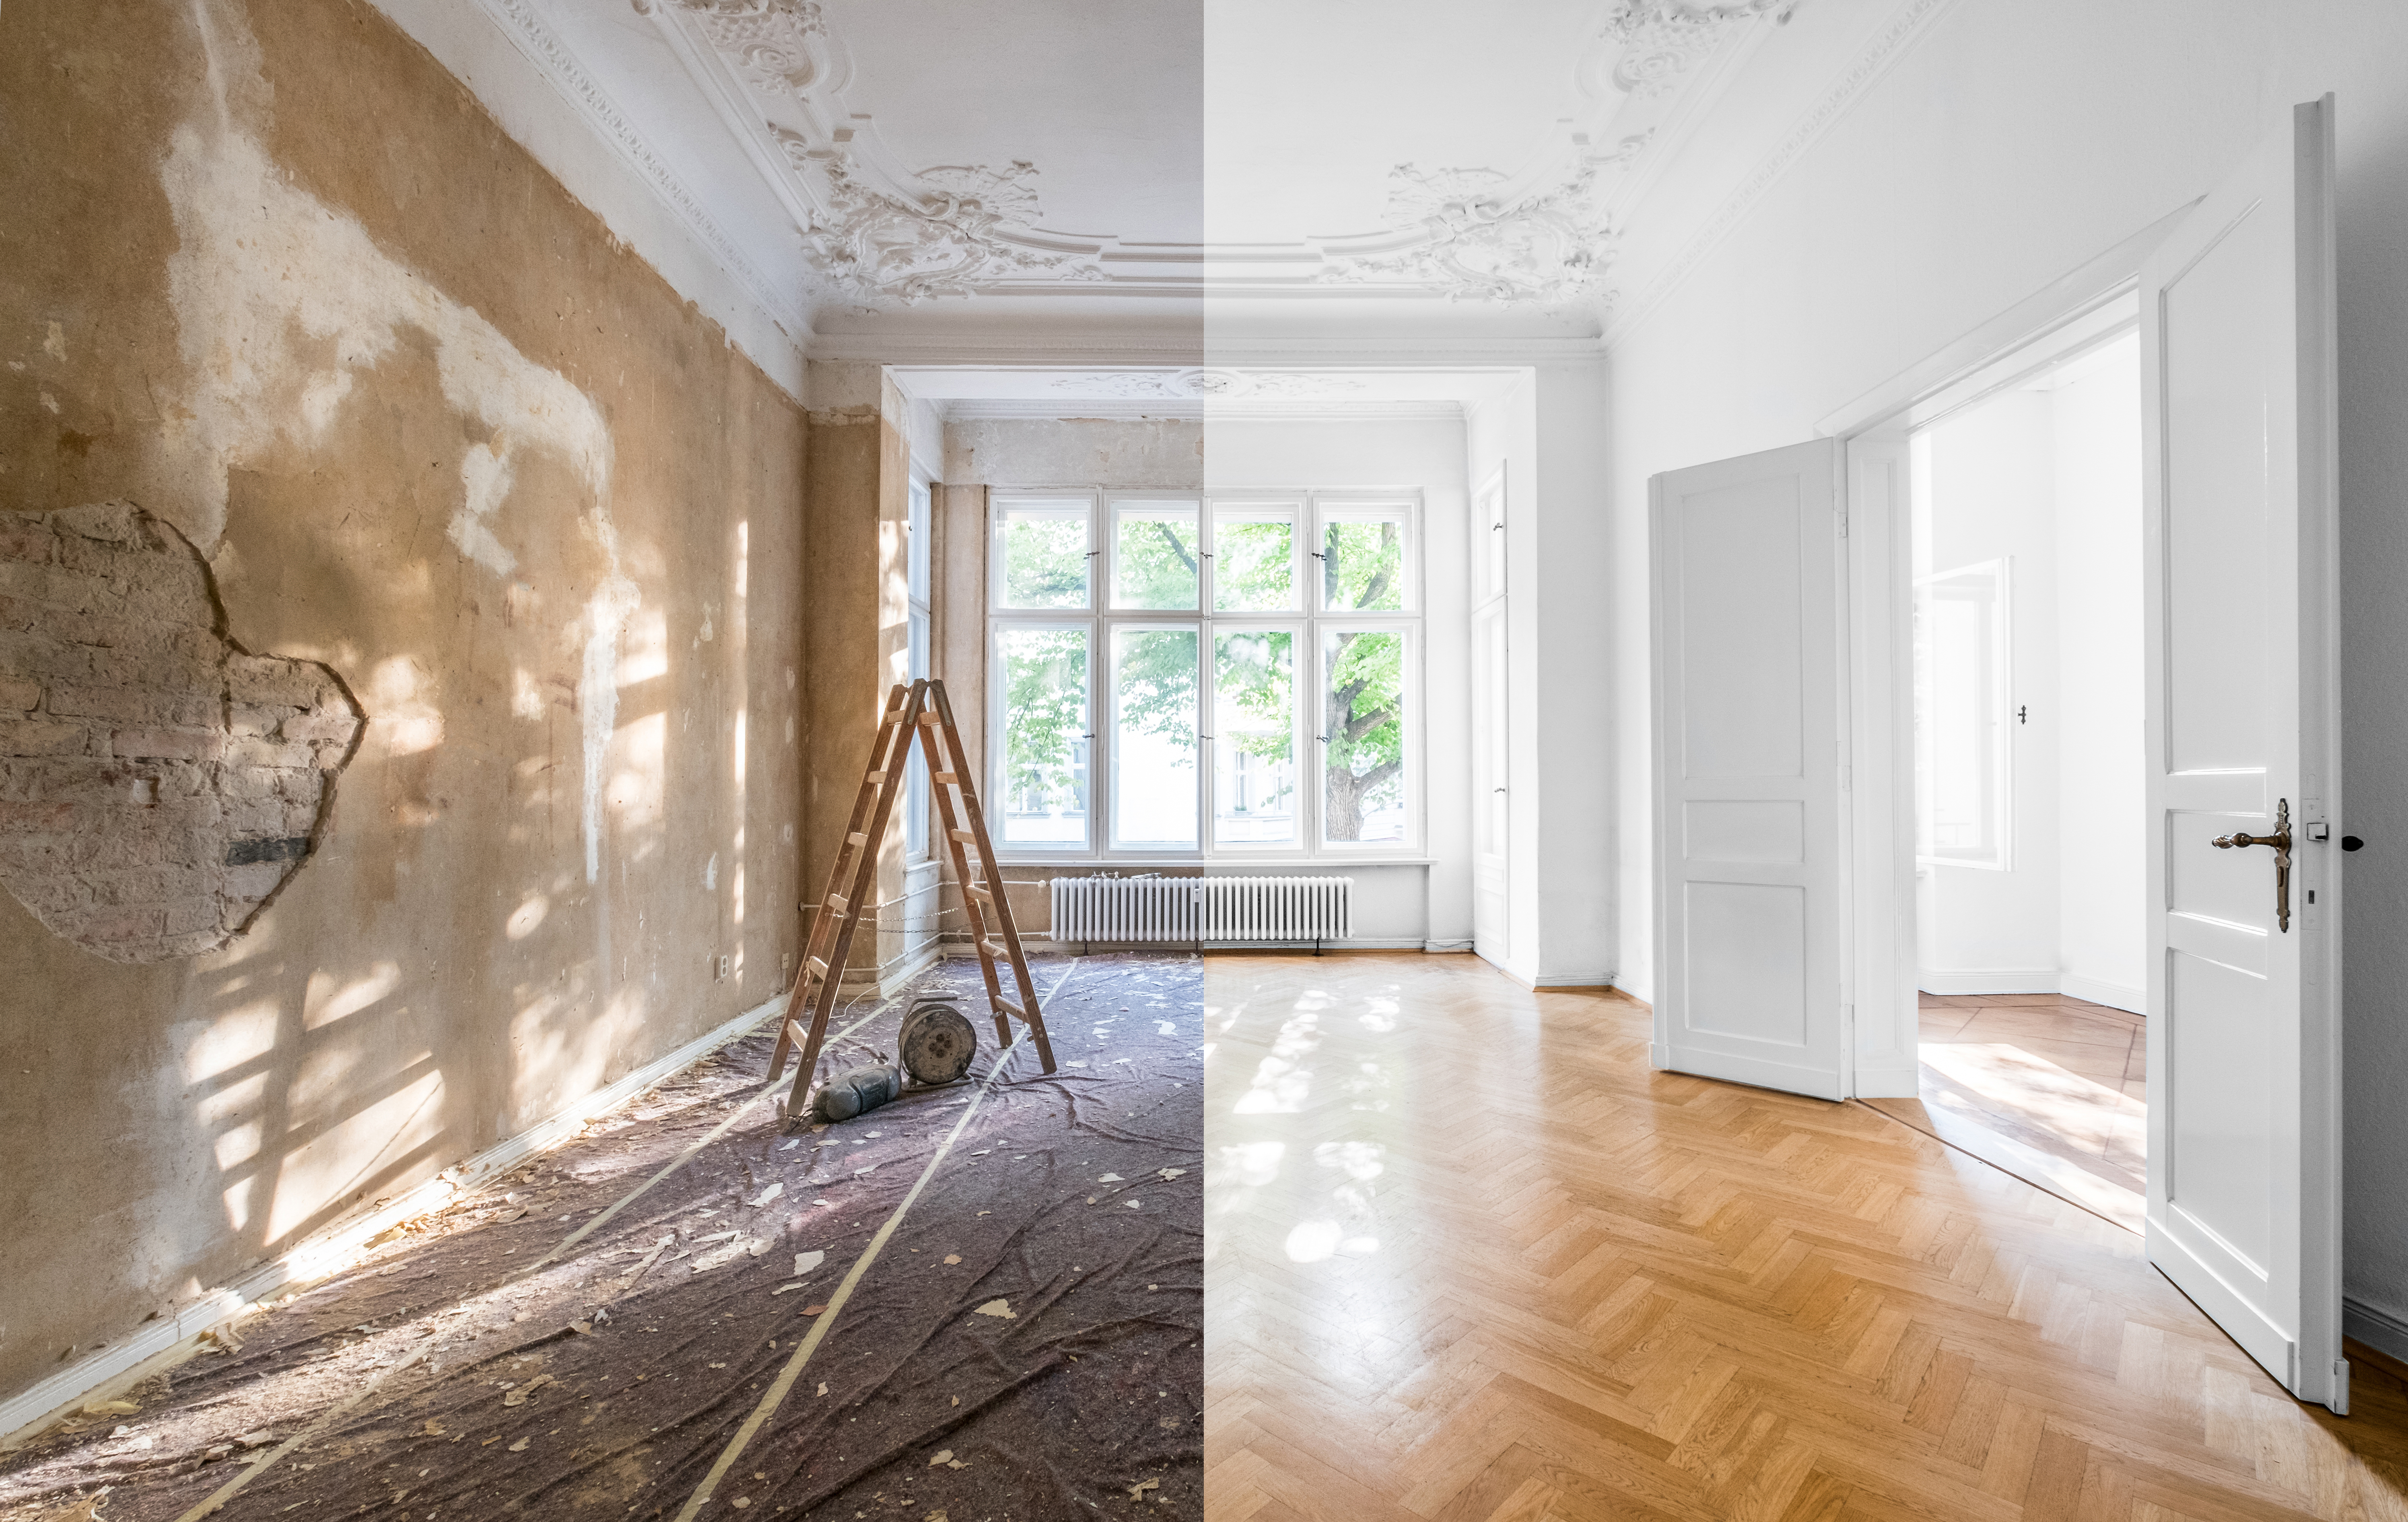 Before and after renovation of a room in a home.